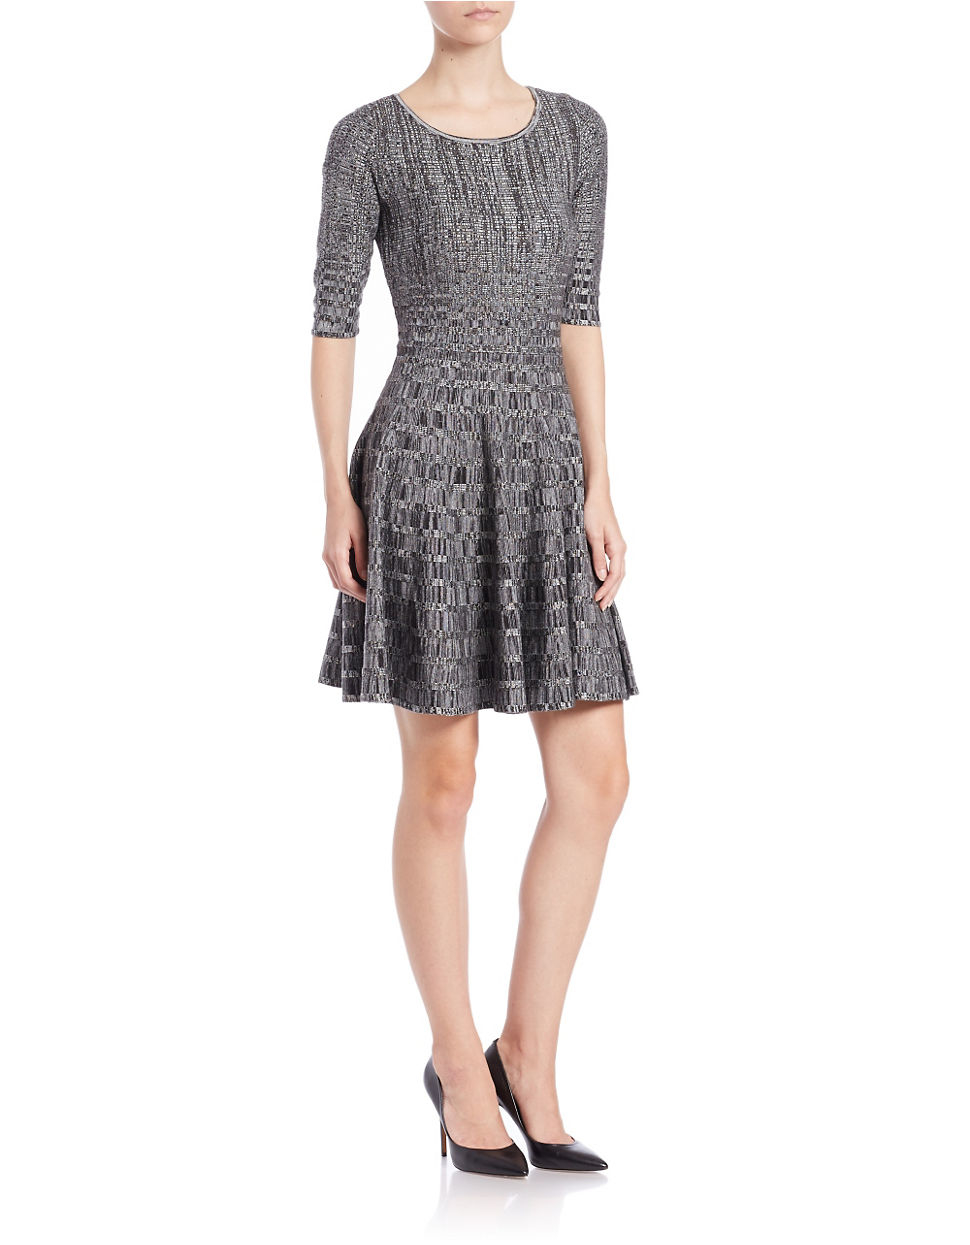 Ivanka trump Textured Fit-and-flare Dress in Black | Lyst